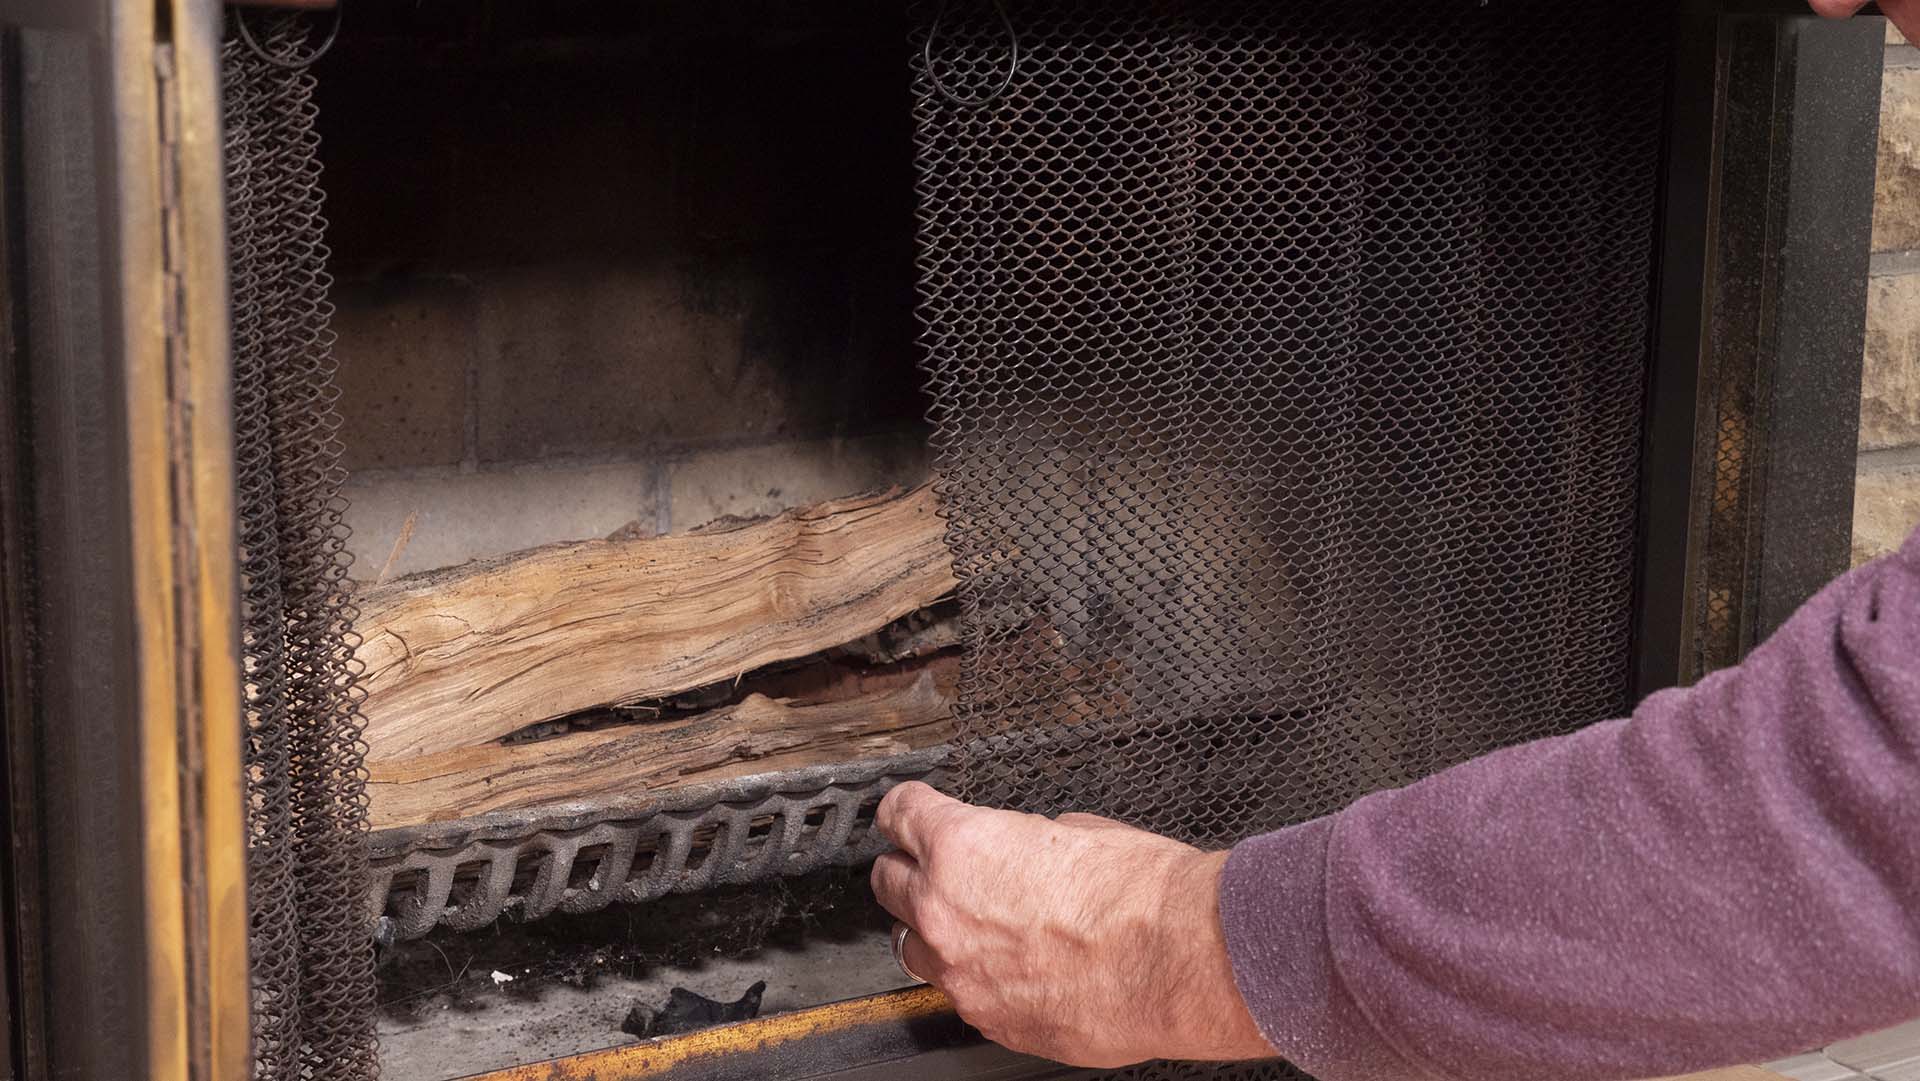 How To Get More Heat Out Of The Fireplace